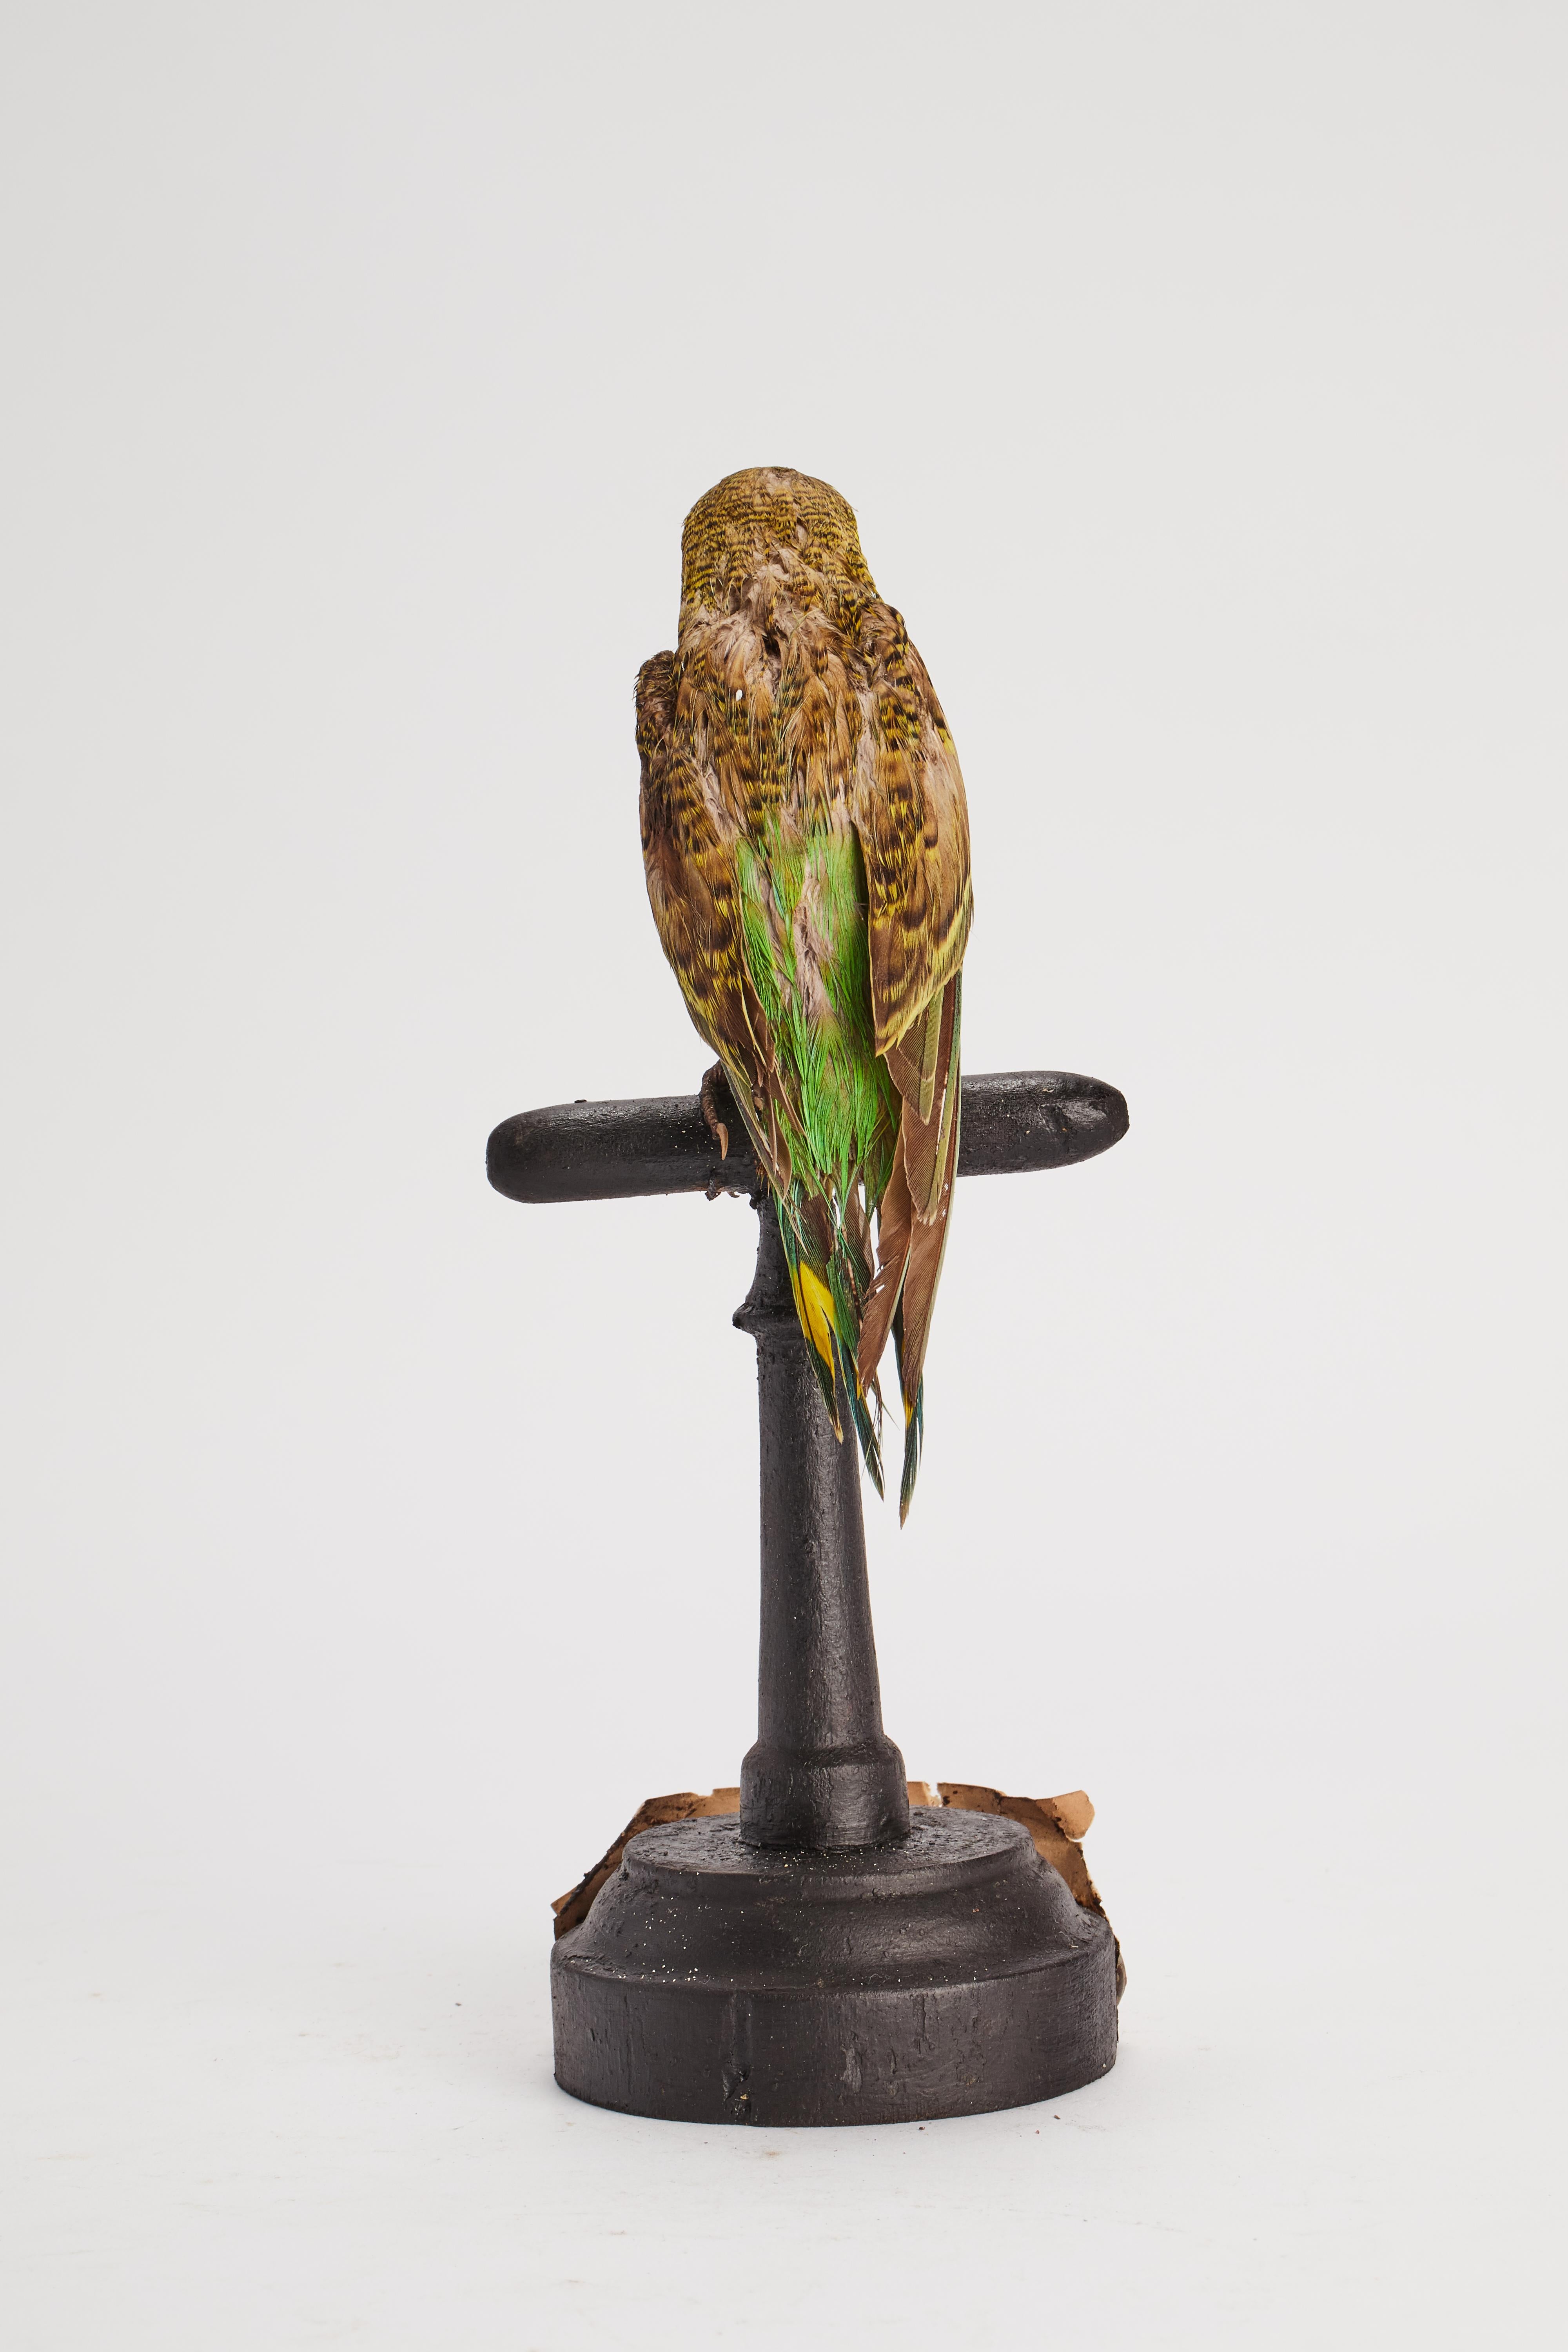 Fruitwood Stuffed bird: (Melopsittacus undulatus) for natural history cabinet, Italy 1880. For Sale